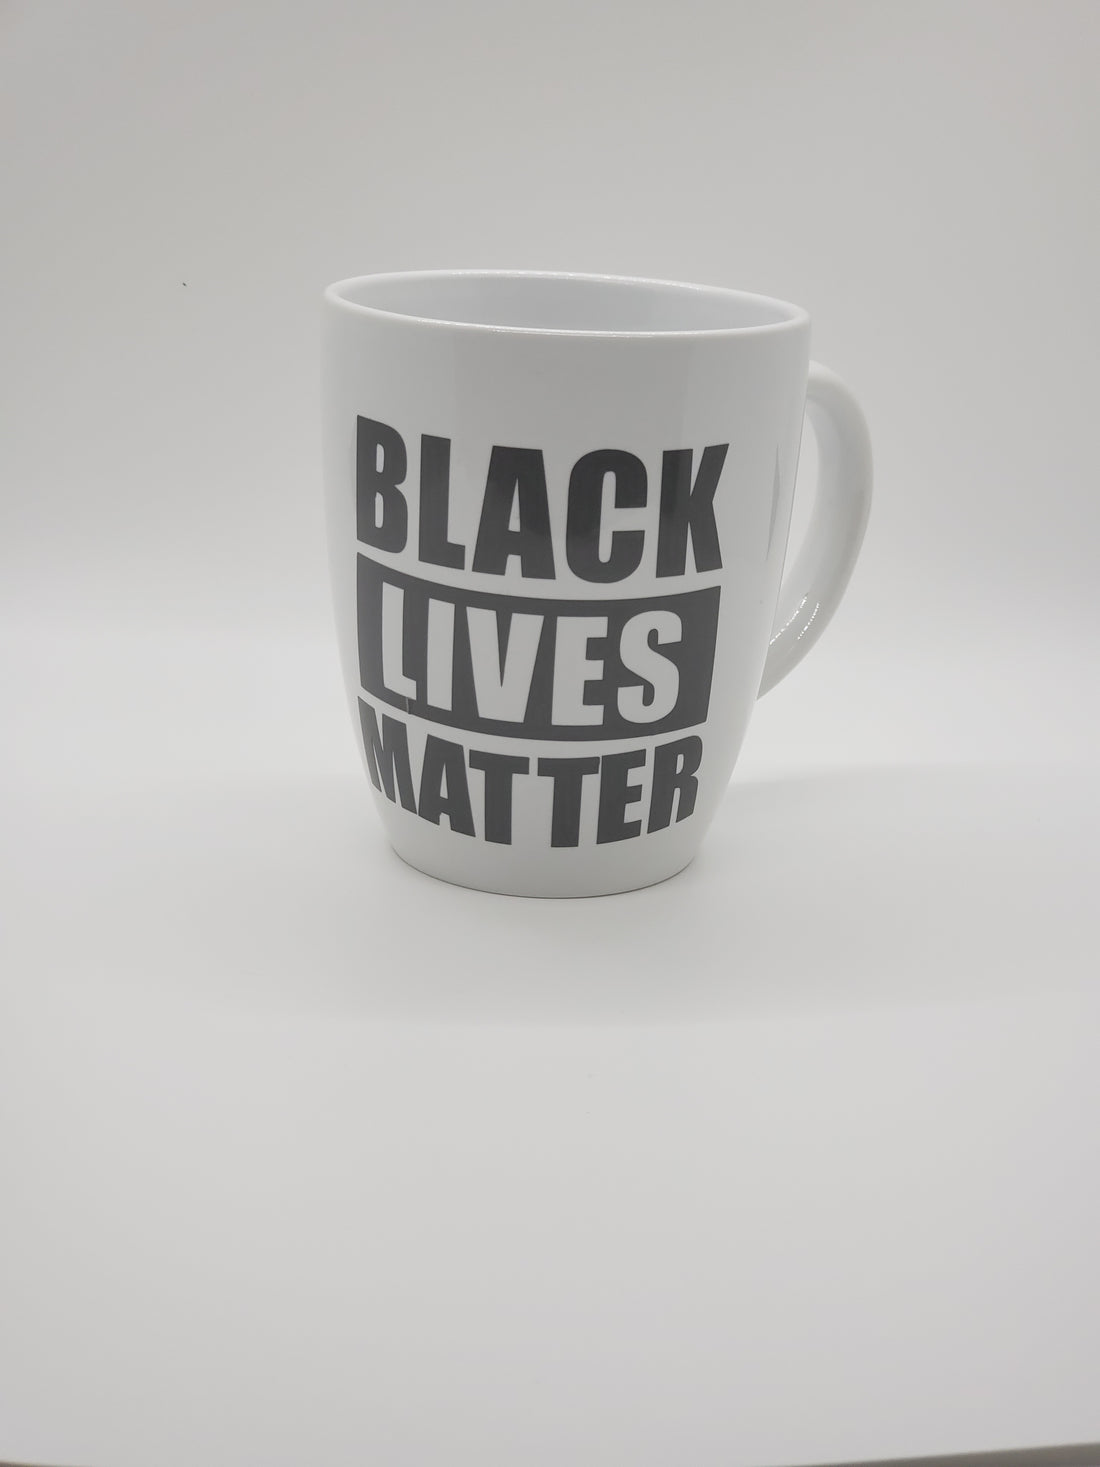 Blm cup